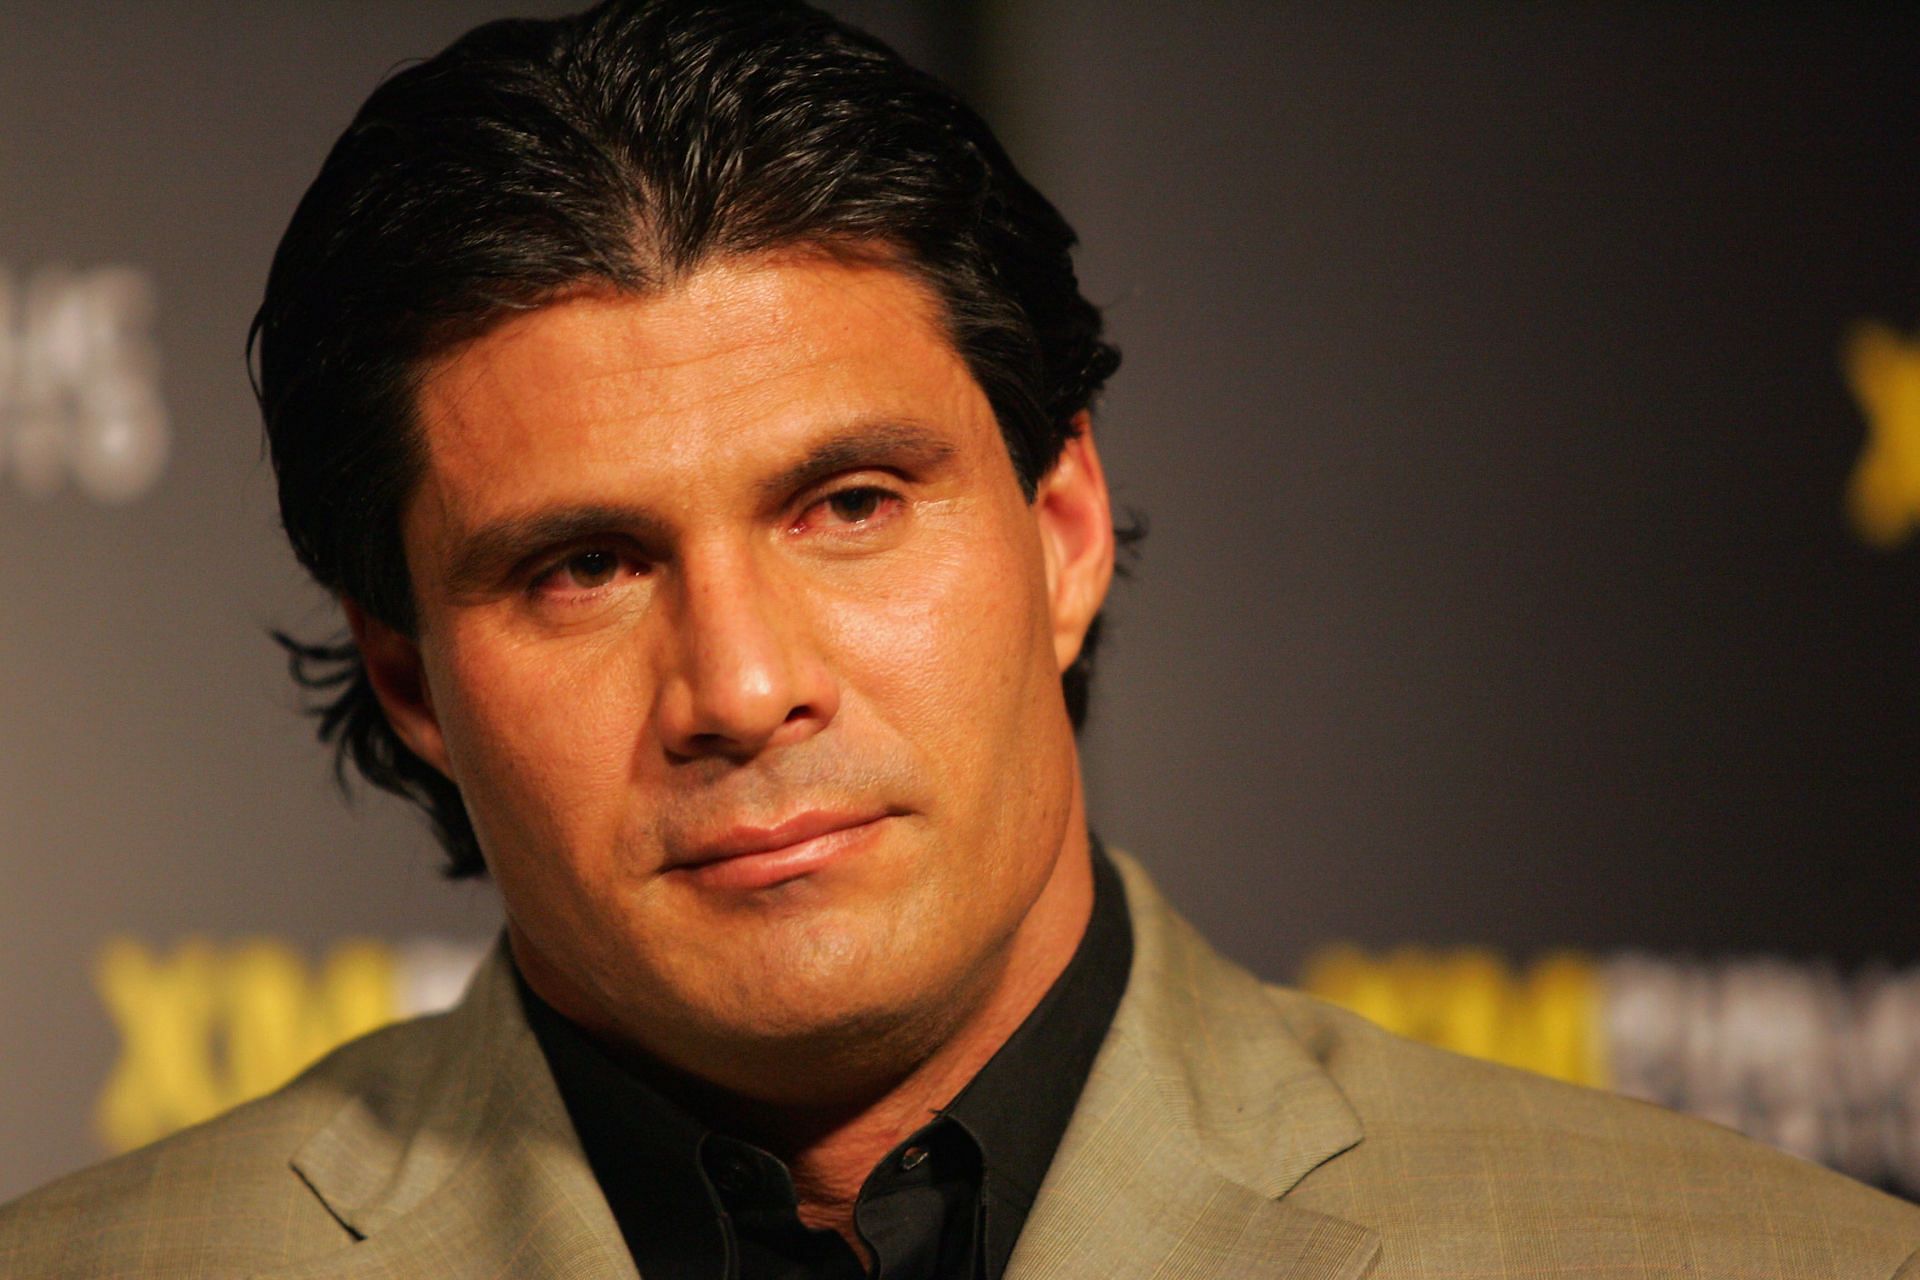 jose canseco age